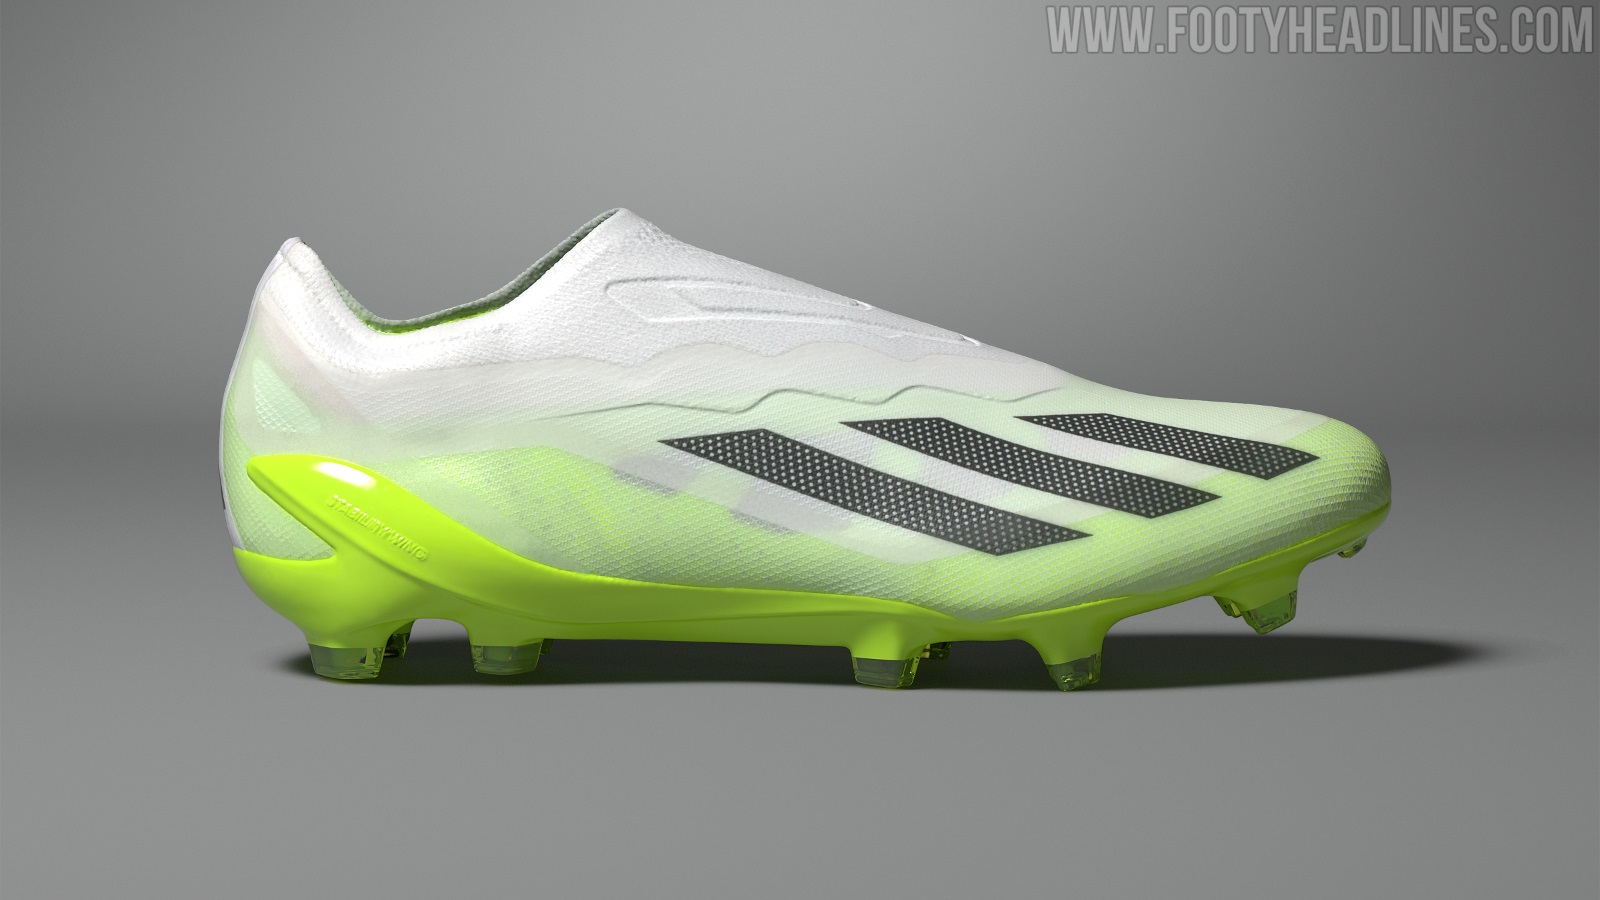 X Boots - Available in 3 Different Versions - Footy Headlines